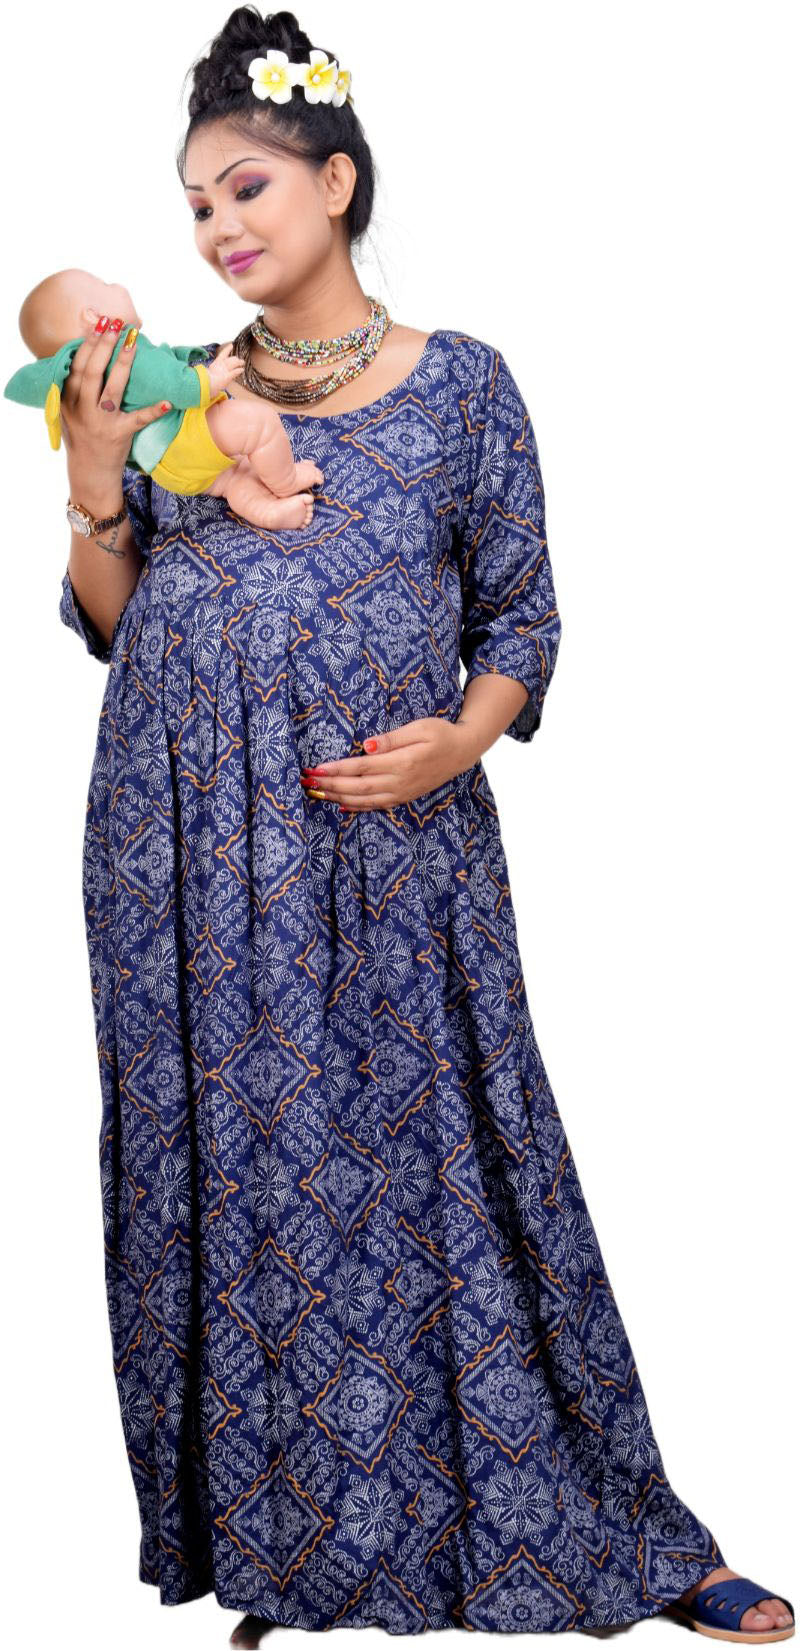 Maternity Summer Dresses Women's Ruffle Solid Sexy Casual Sundress Pregnancy  Clothes, Pregnancy clothes, Pregnancy wear, Maternity fashion - My Online  Collection Store, Bengaluru | ID: 2851553370473